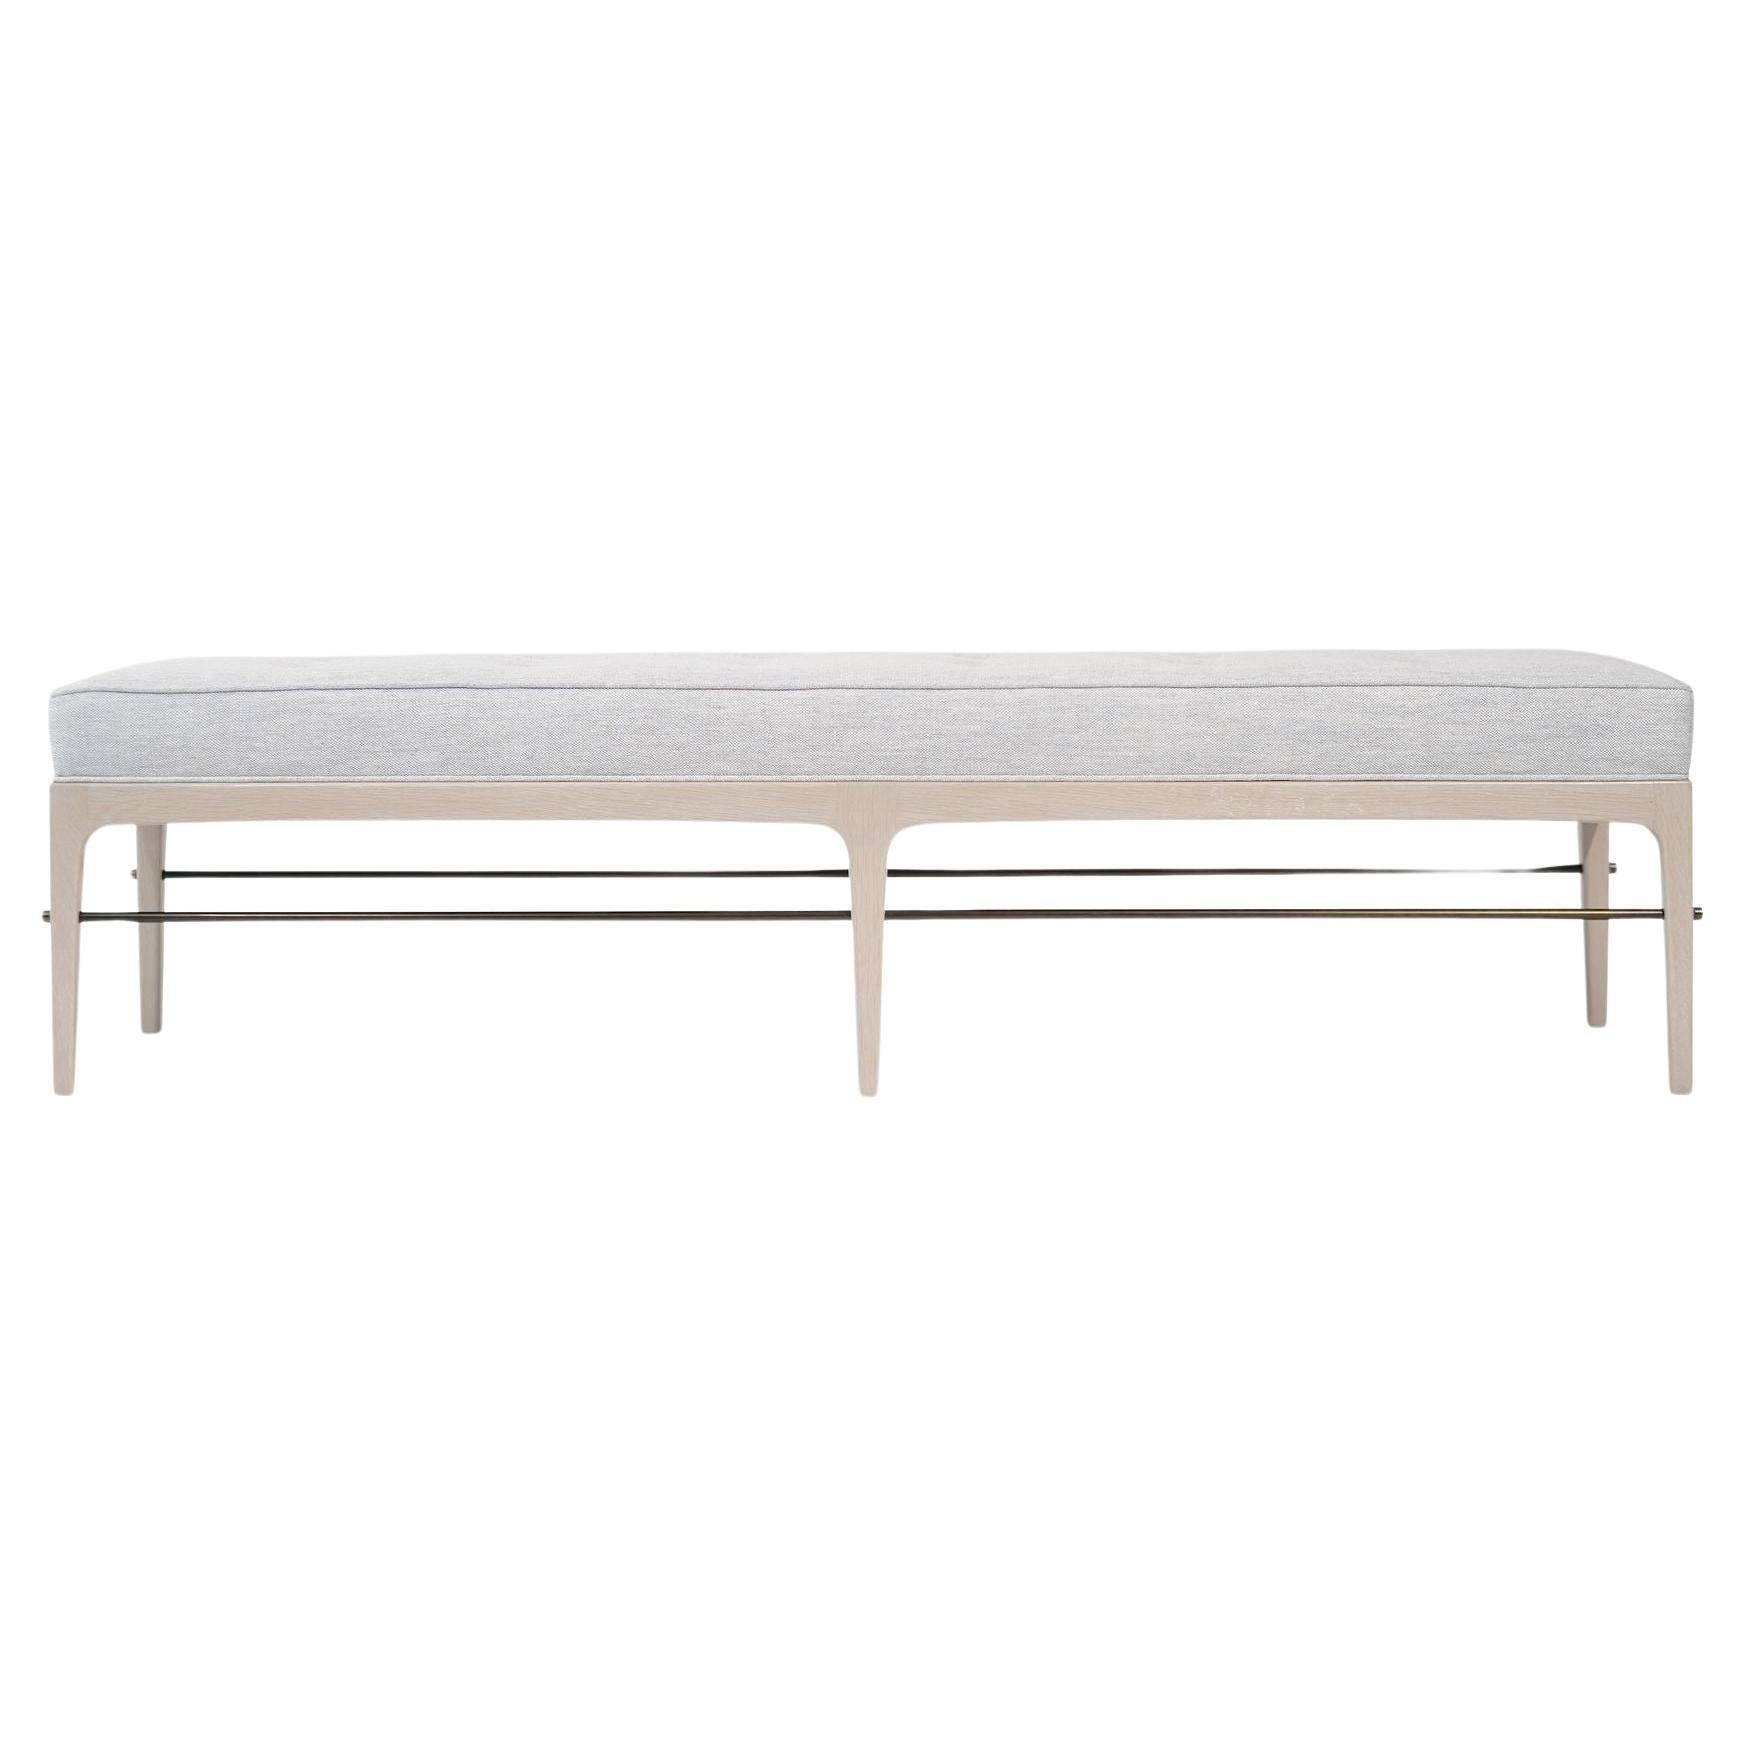 Linear Bench in White Oak and Bronze Series 72